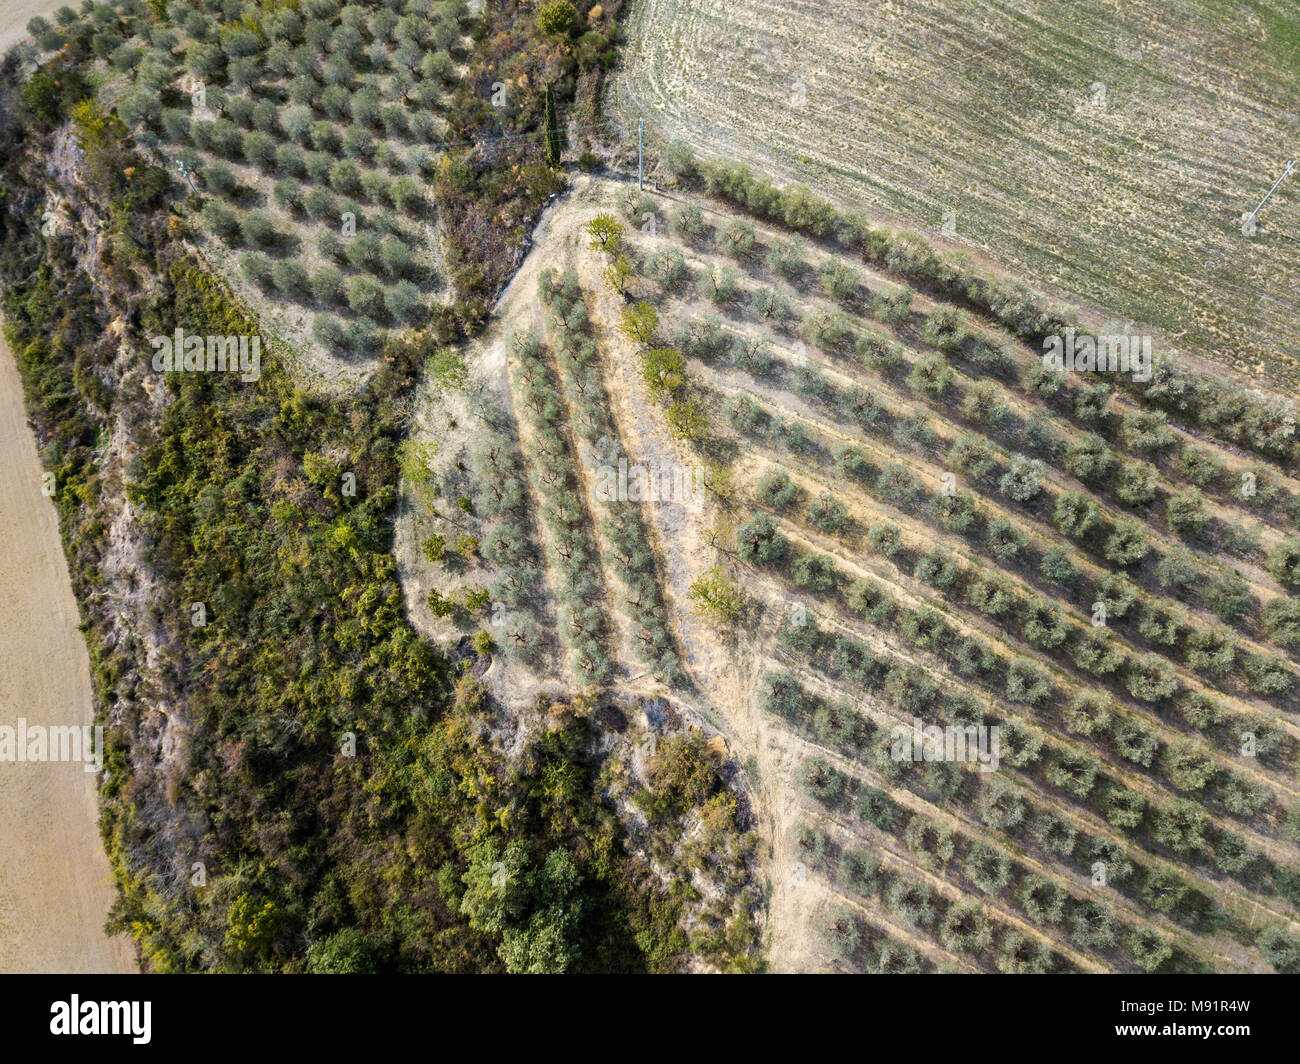 Rows of olive trees in Northern Italy Stock Photo